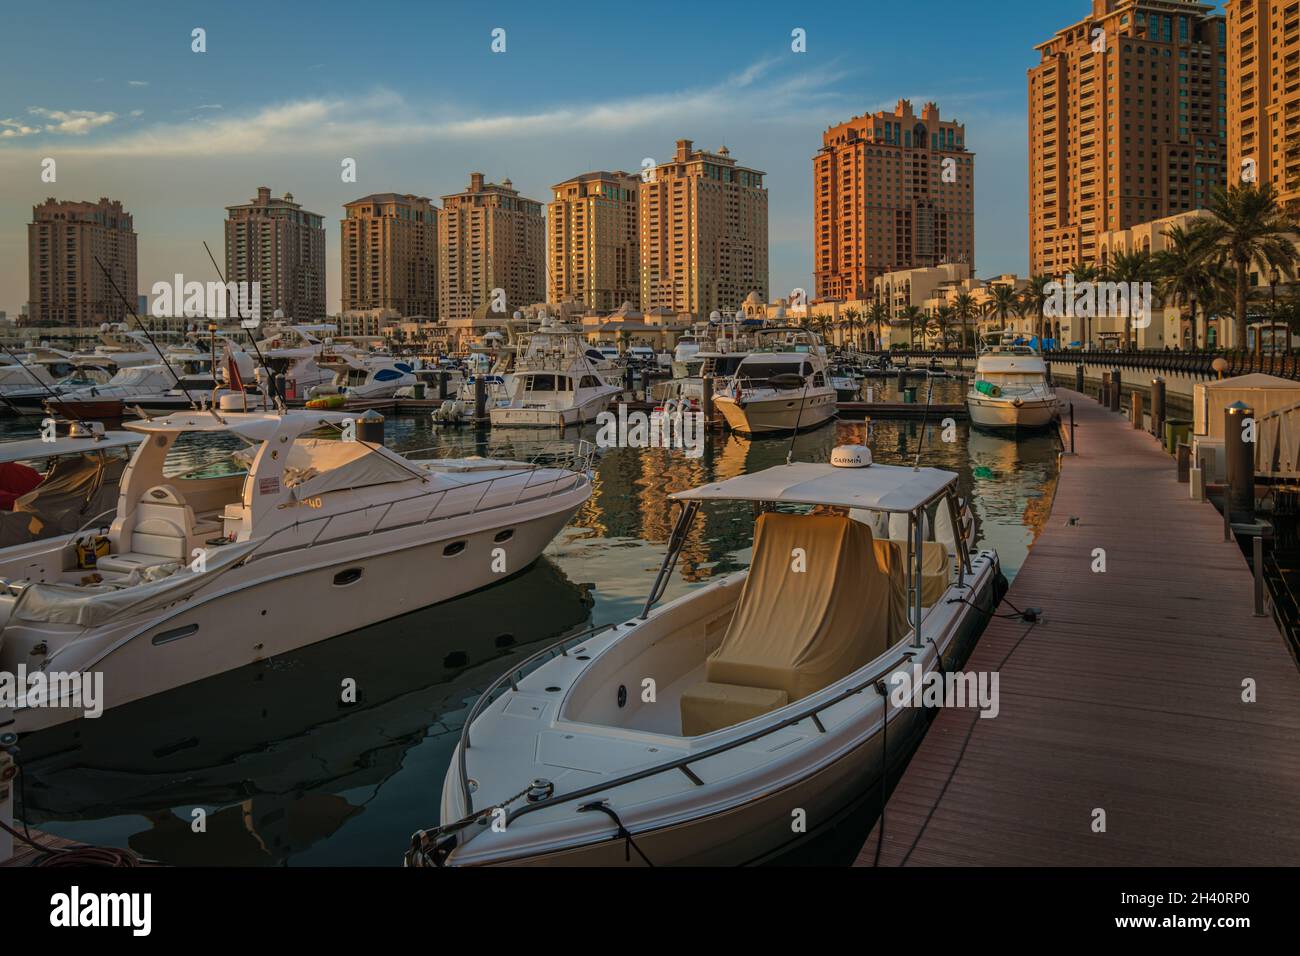 Porto Arabia Marina in The pearl Doha, Qatar sunset  shot showing luxurious yachts docked at the marina with  residential buildings in background. Stock Photo